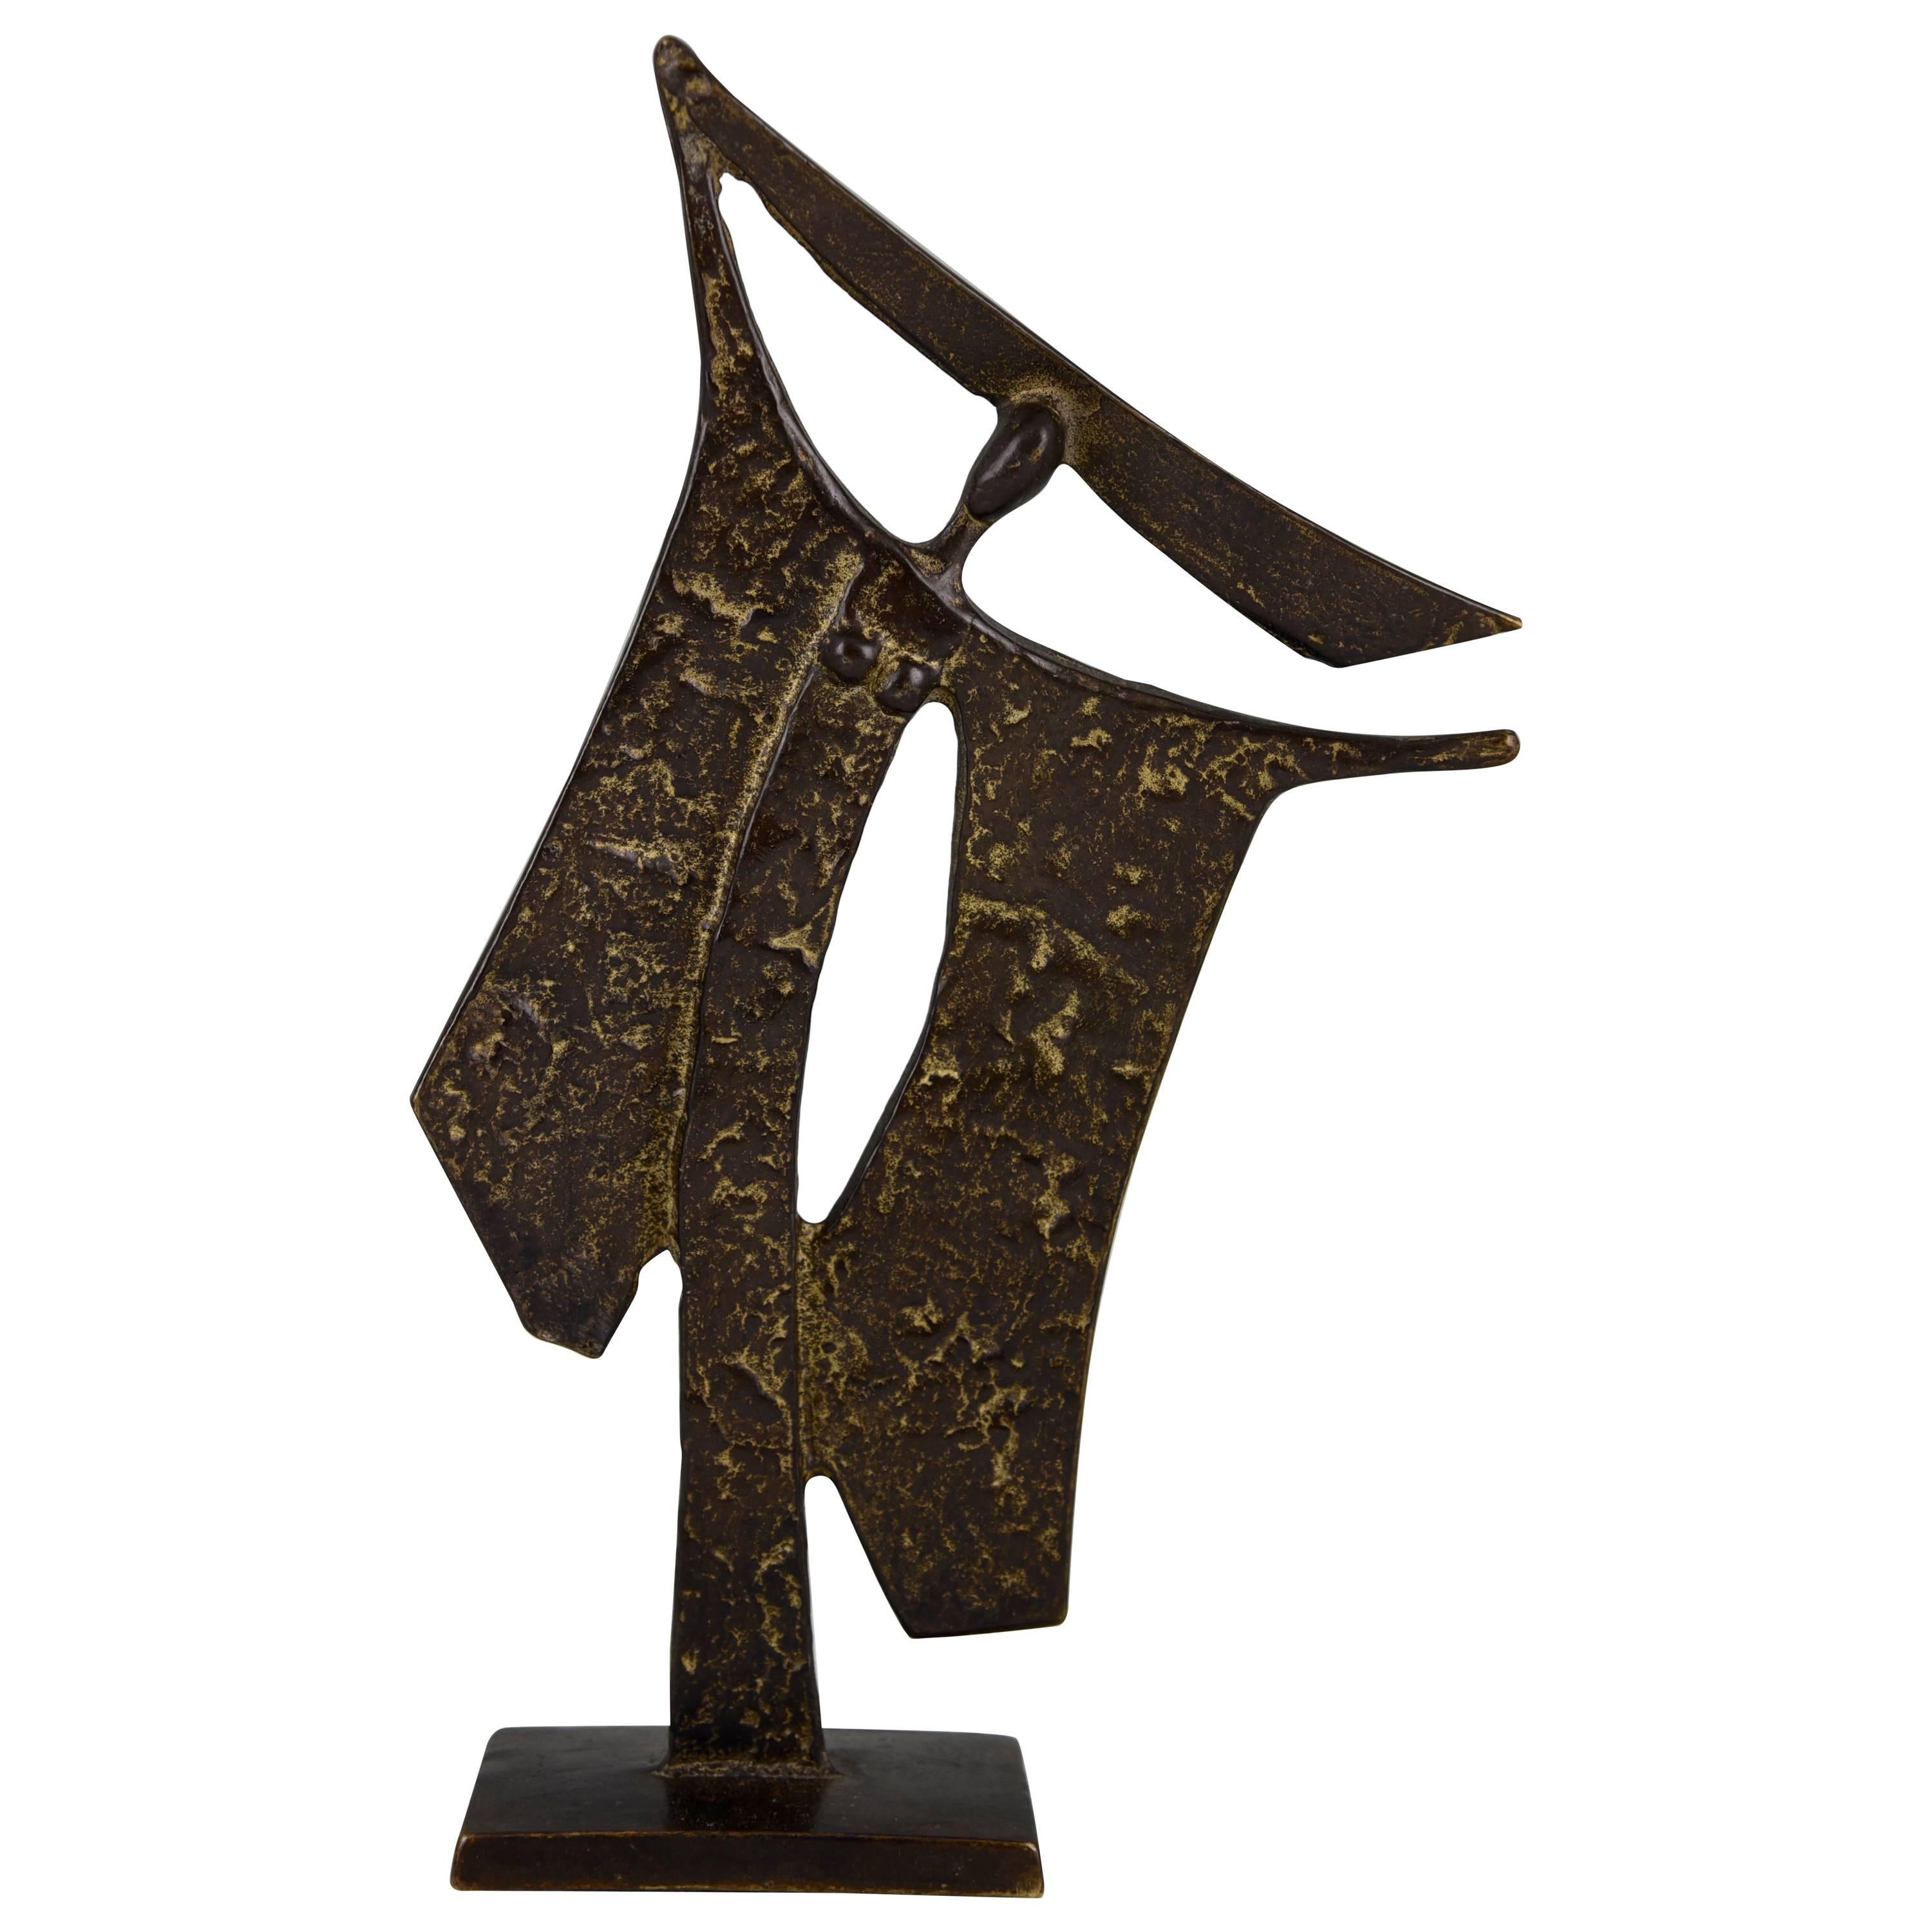 Bronze Sculpture of a Woman by Ugo Cara, Trieste Italy, 1960 Signed Numbered